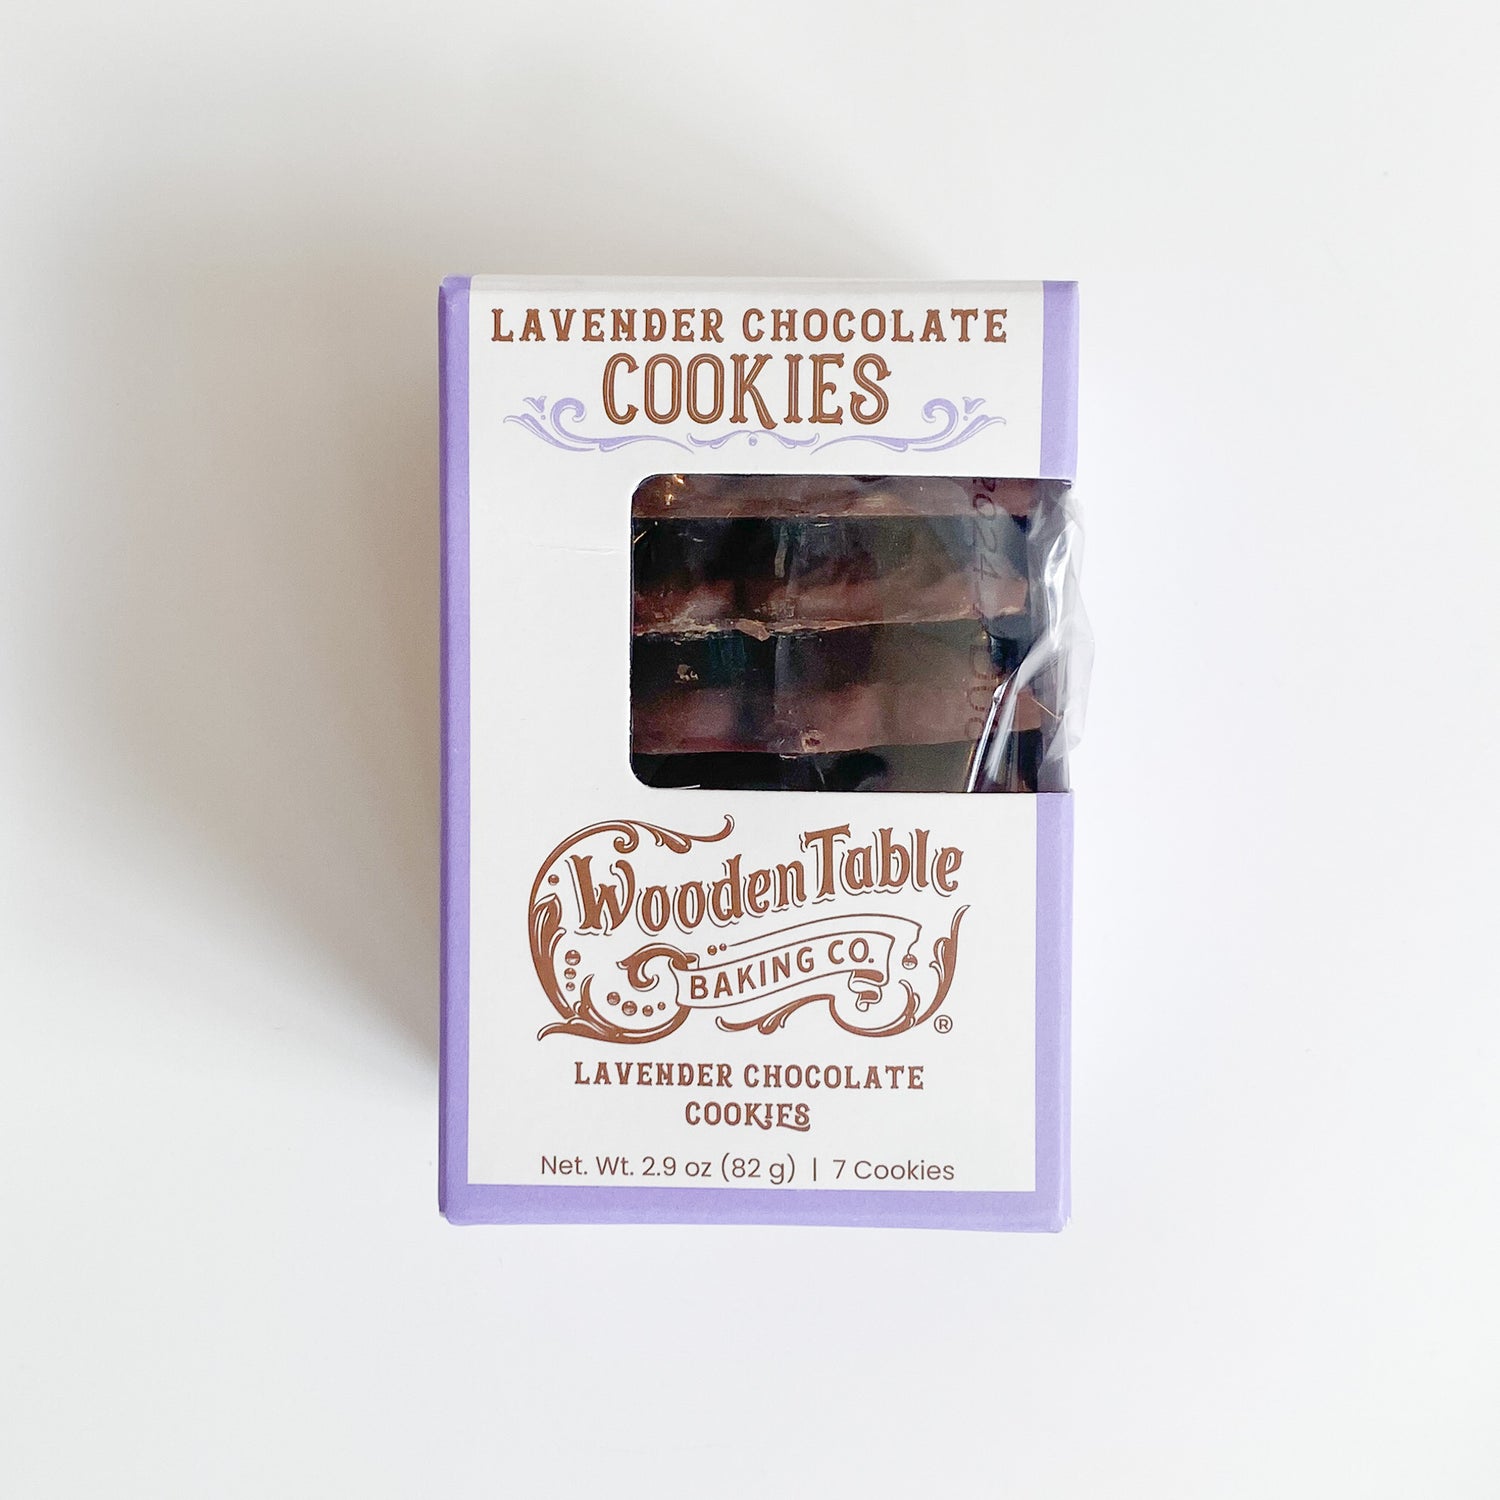 Tea Cookies by Wooden Table Baking Co.